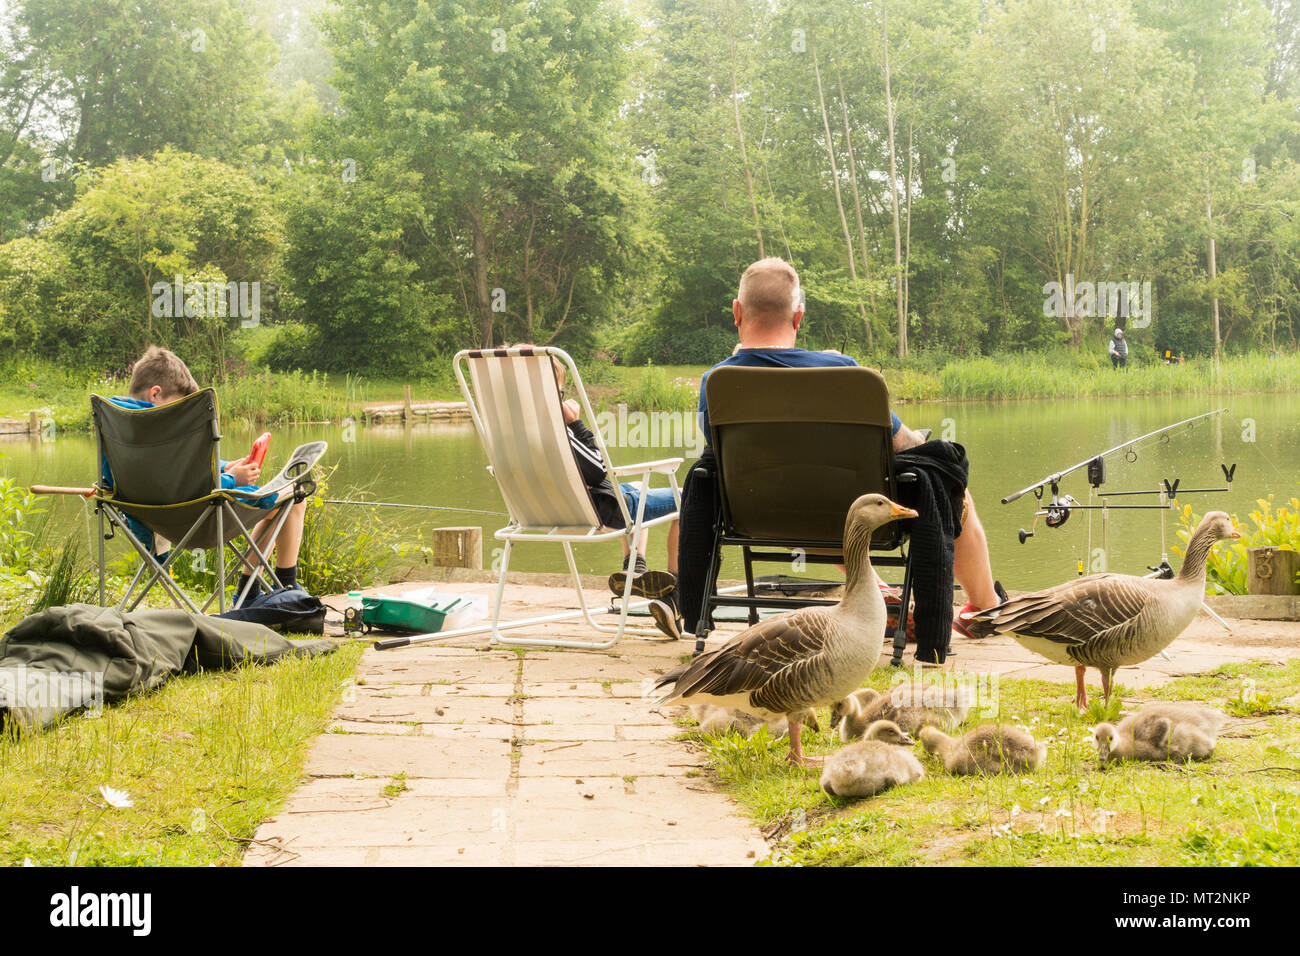 Henlow, Bedfordshire, UK, 28th May 2018. A Dad and his two sons enjoying a fishing session, one boy seems more interested in his electronic device than the fishing. A Canada Goose and goslings wait for discarded bait. Credit: Mick Flynn/Alamy Live News Stock Photo